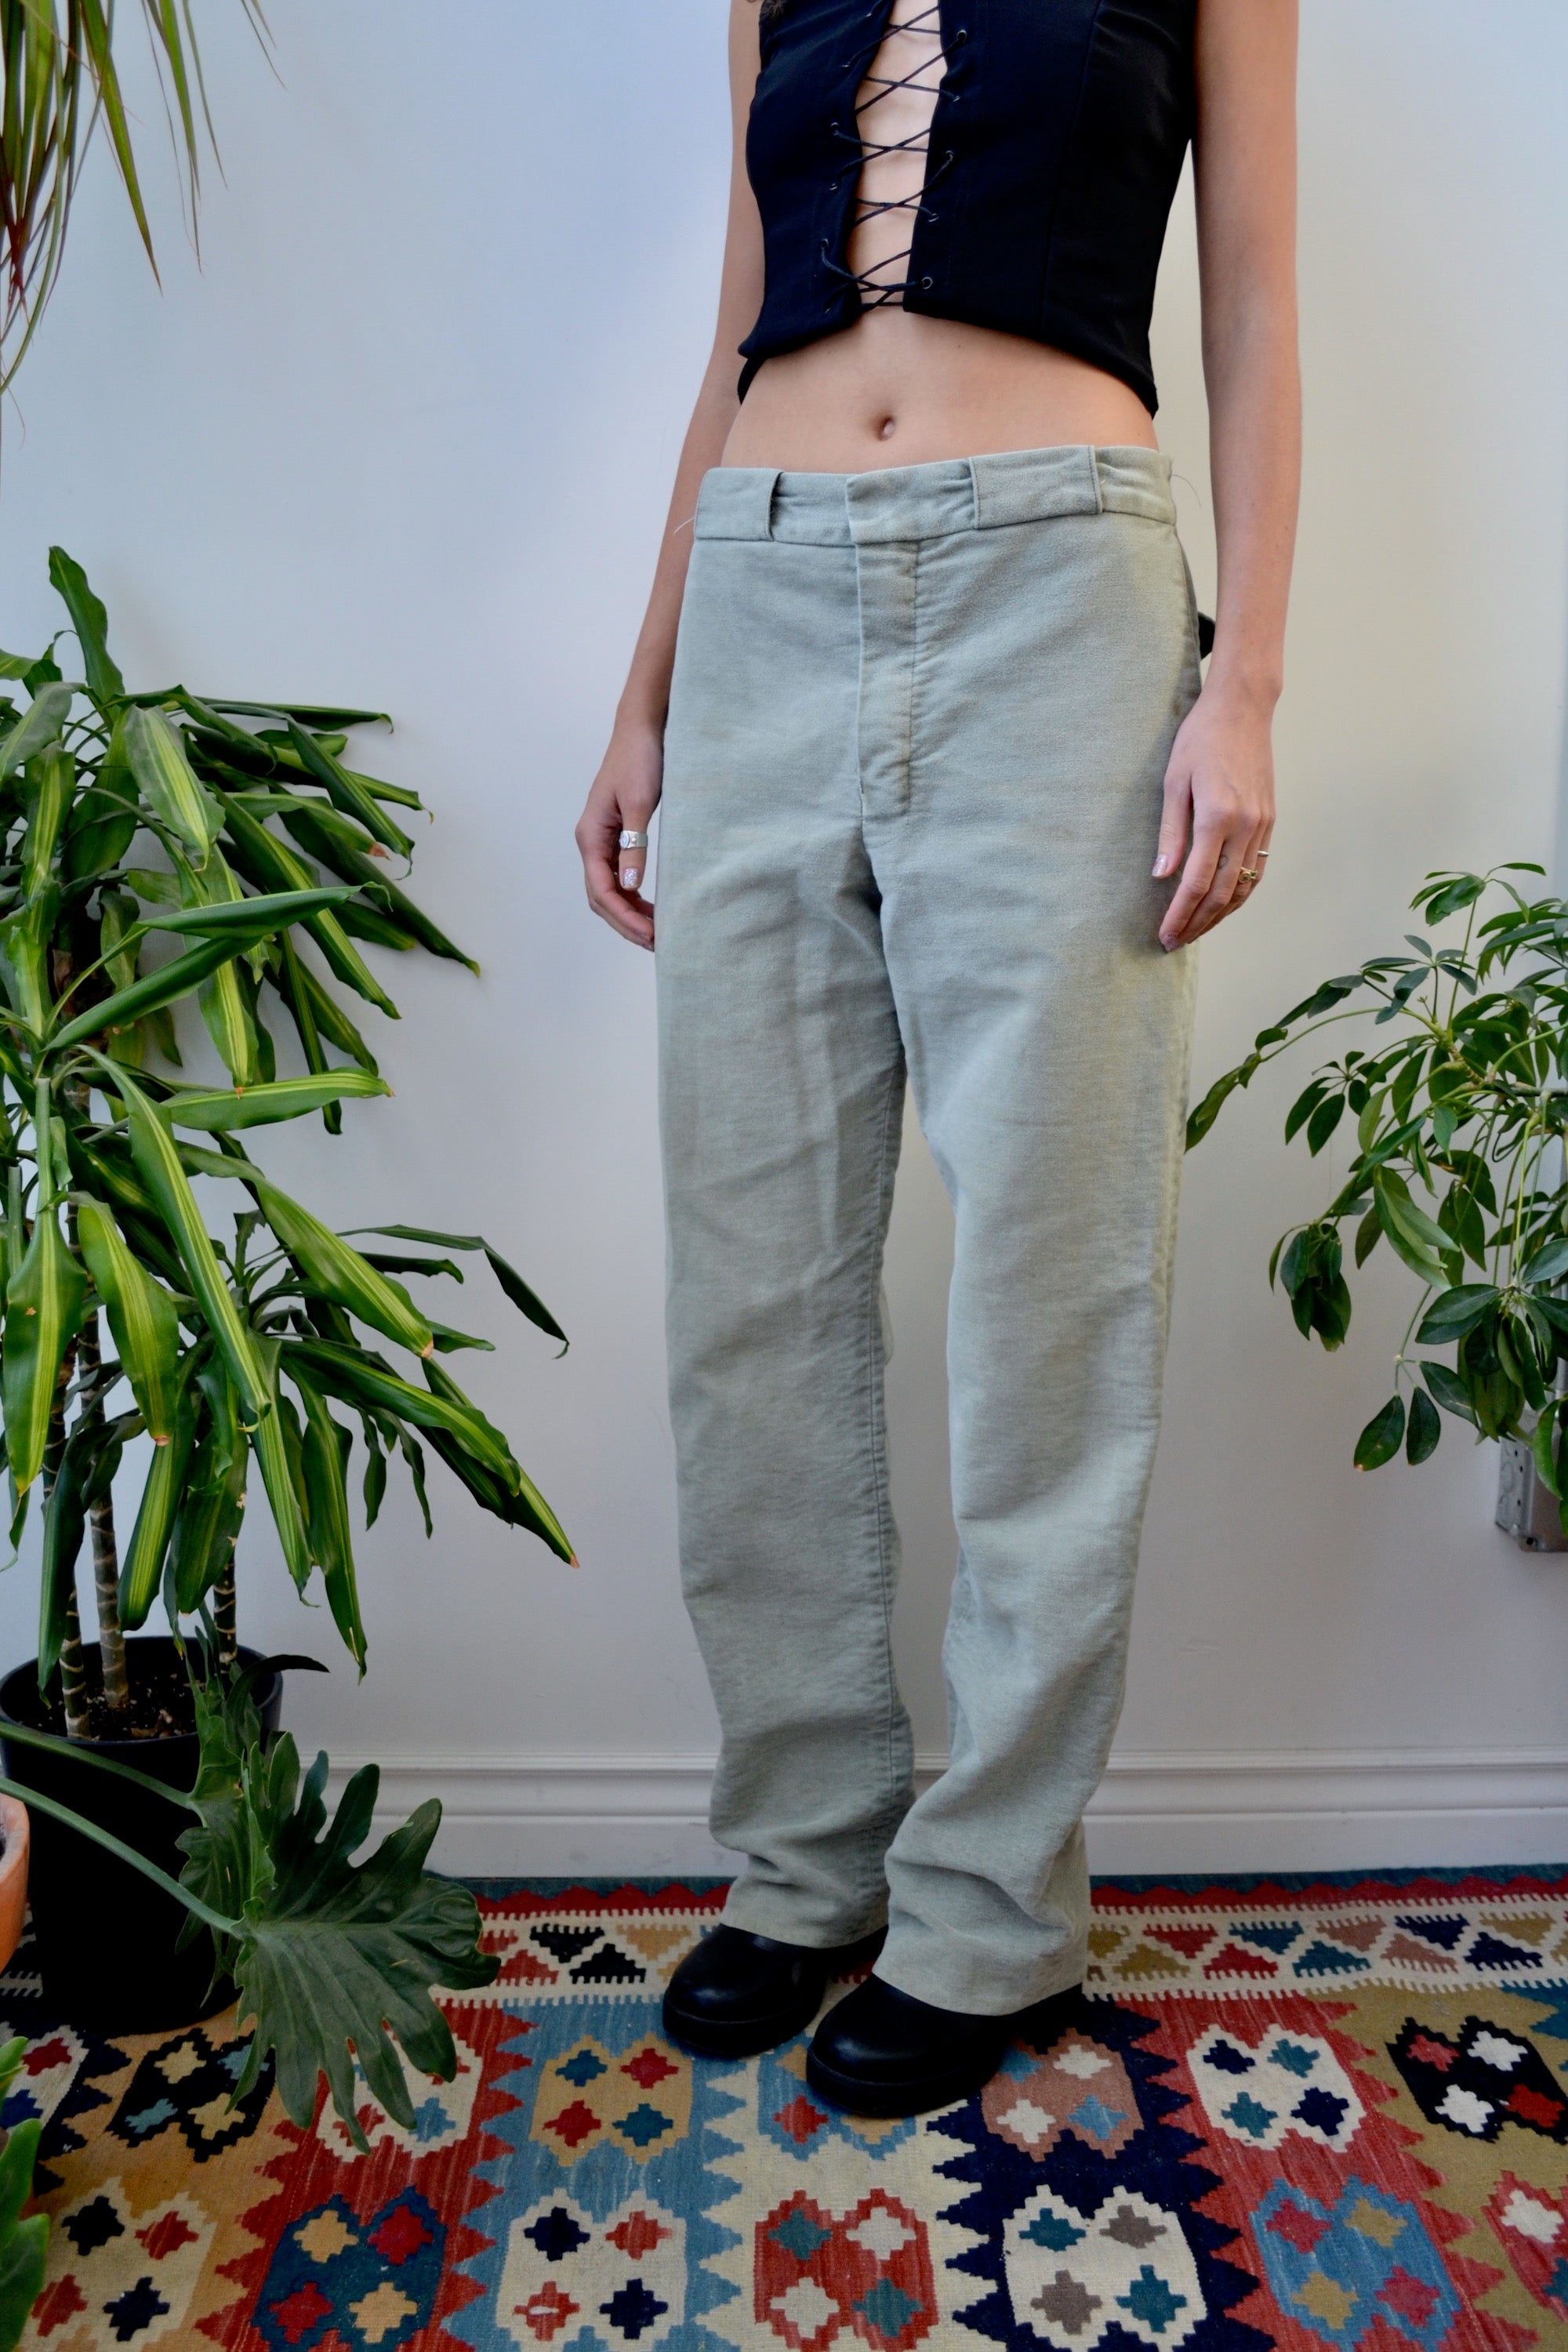 Made in England LL Bean Trousers